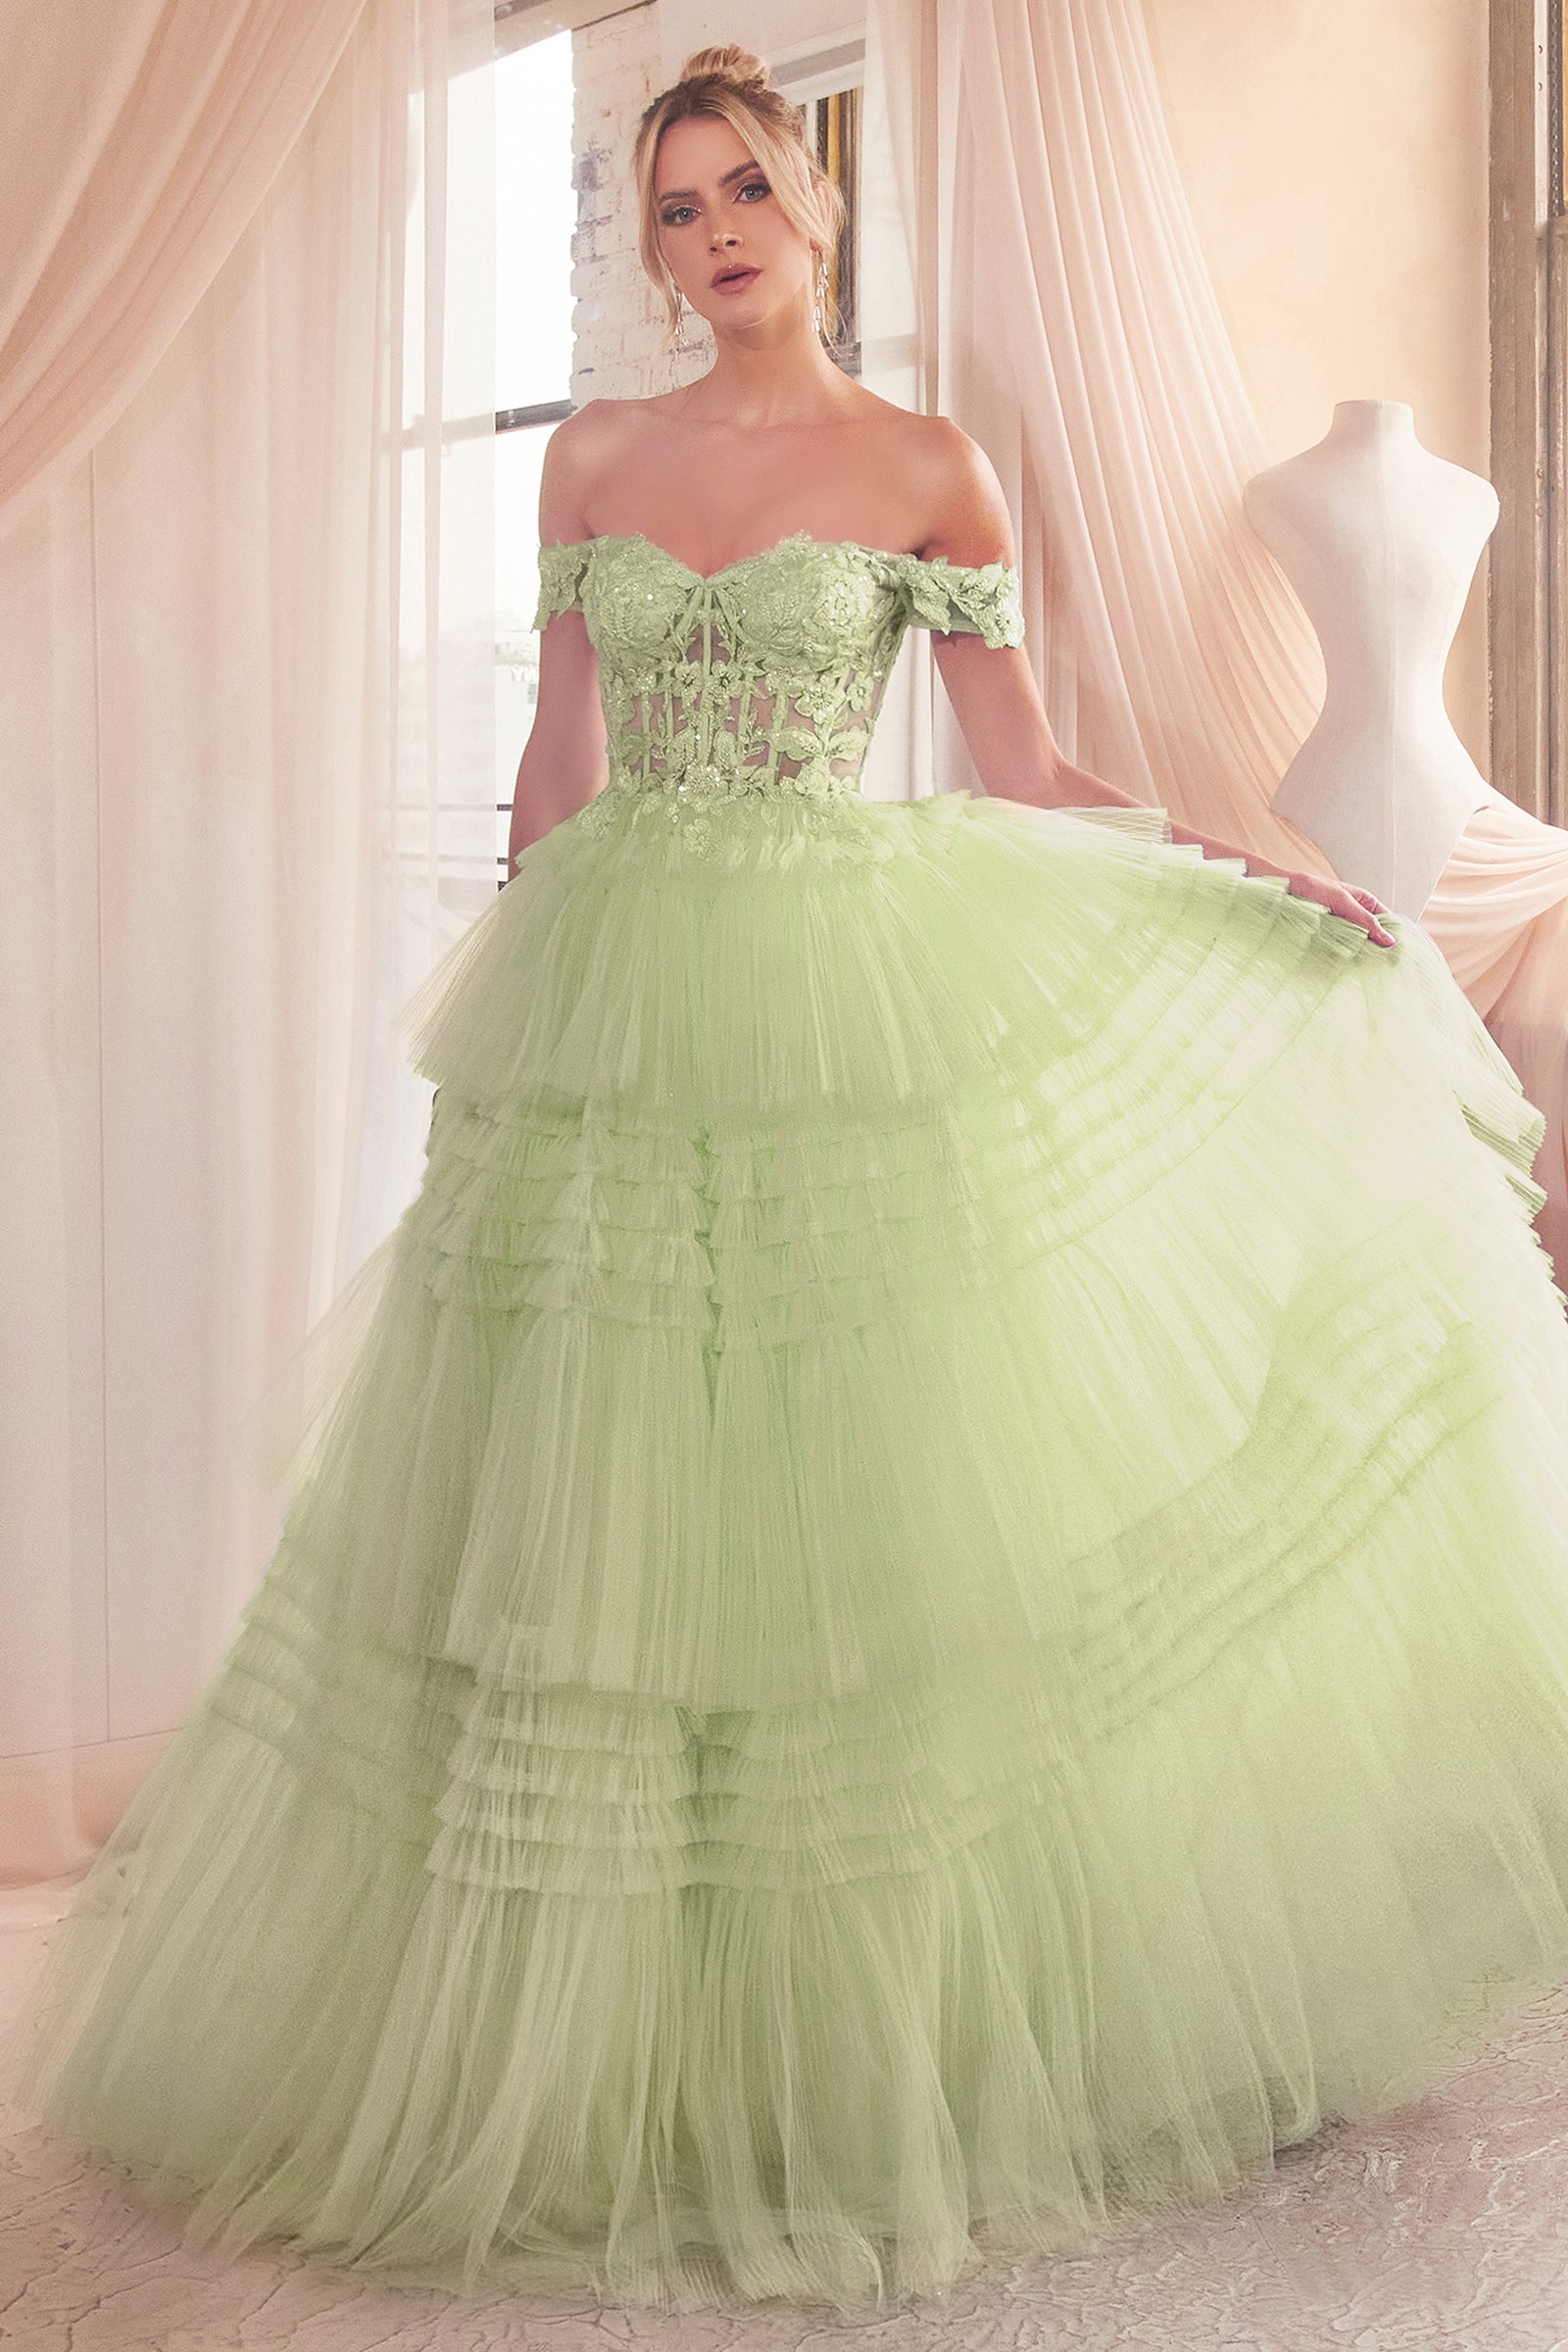 LISTARI Tulle Waterfall Off Shoulder Ball Gown Prom & Formal Dress